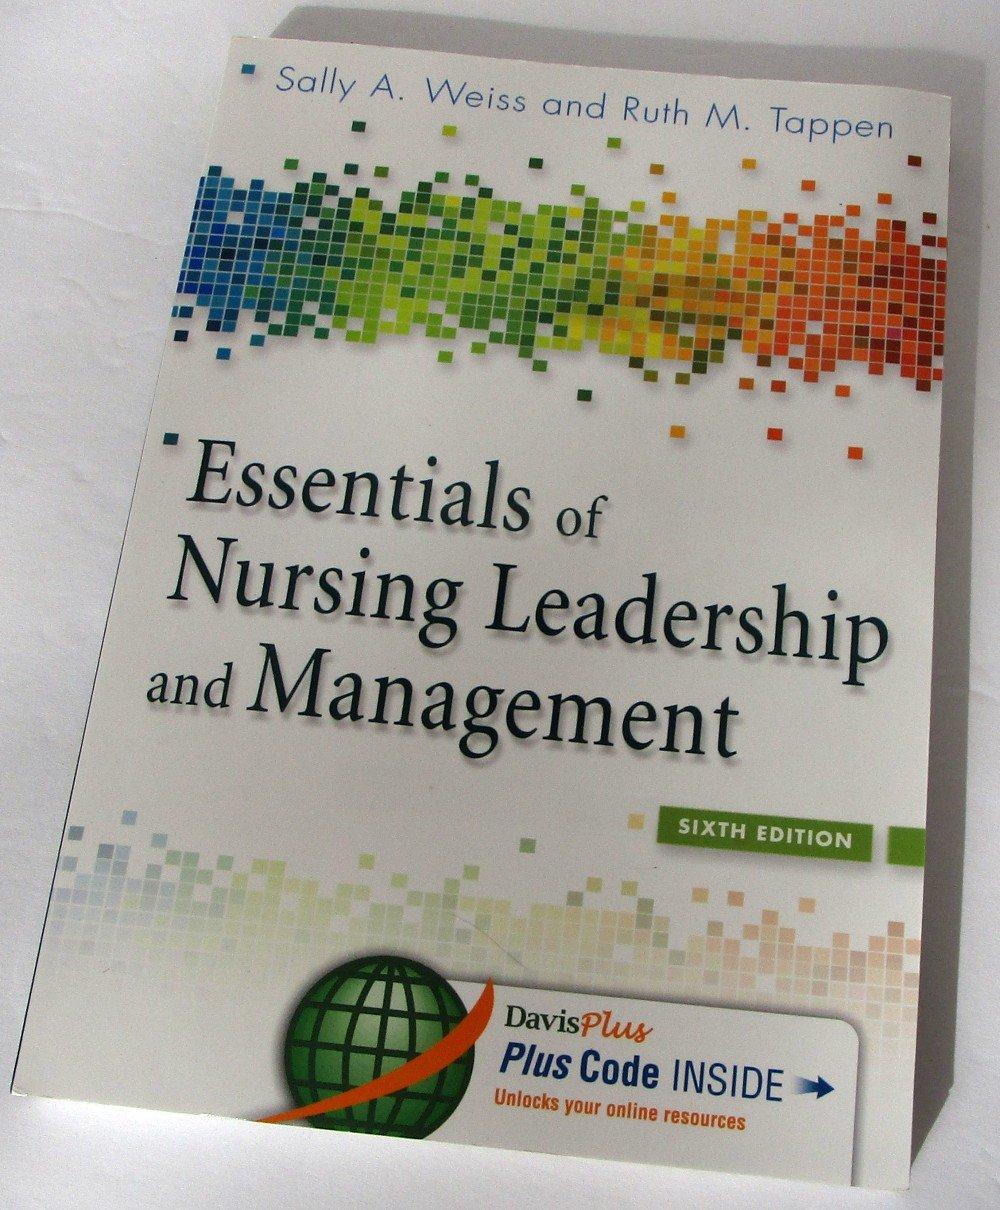 essentials of nursing leadership and management 6th edition sally a. weiss, ruth m. tappen 0803636636,